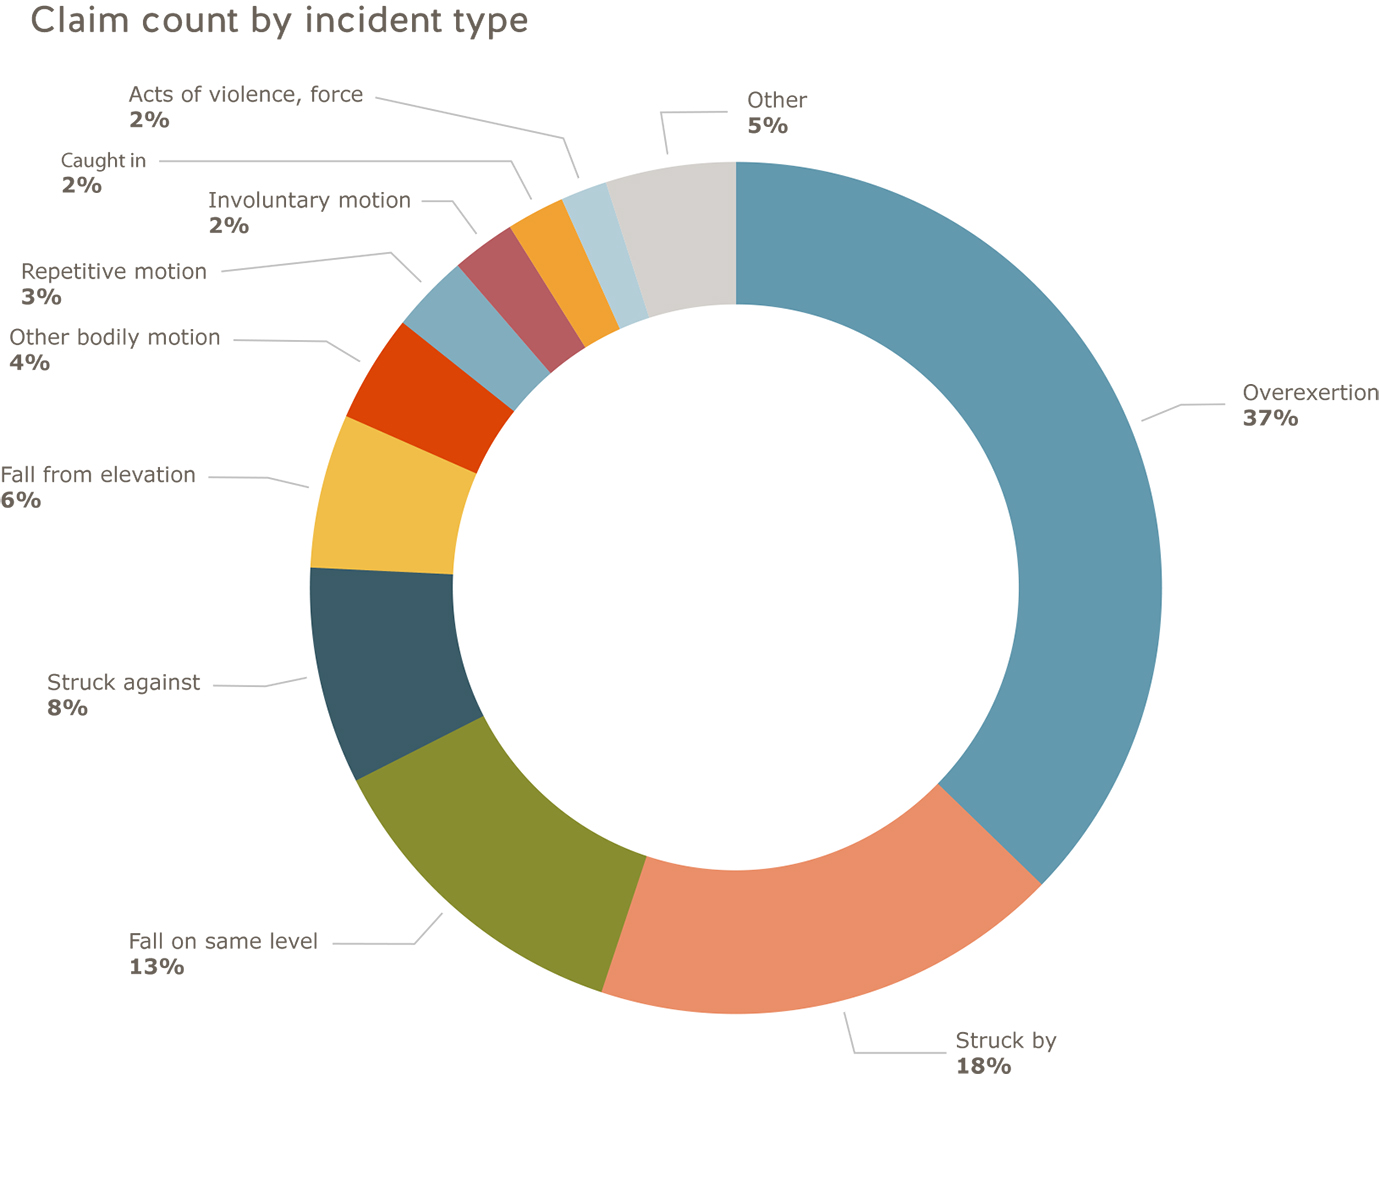 Retail industry claim count by incident type: overexertion=37%; struck by=18%; fall on same level=13%; struck against=8%; fall from elevation=6%; other bodily motion=4%; repetitive motion=3%; involuntary motion=2%; caught in=2%; acts of violence, force=2%; other=5%